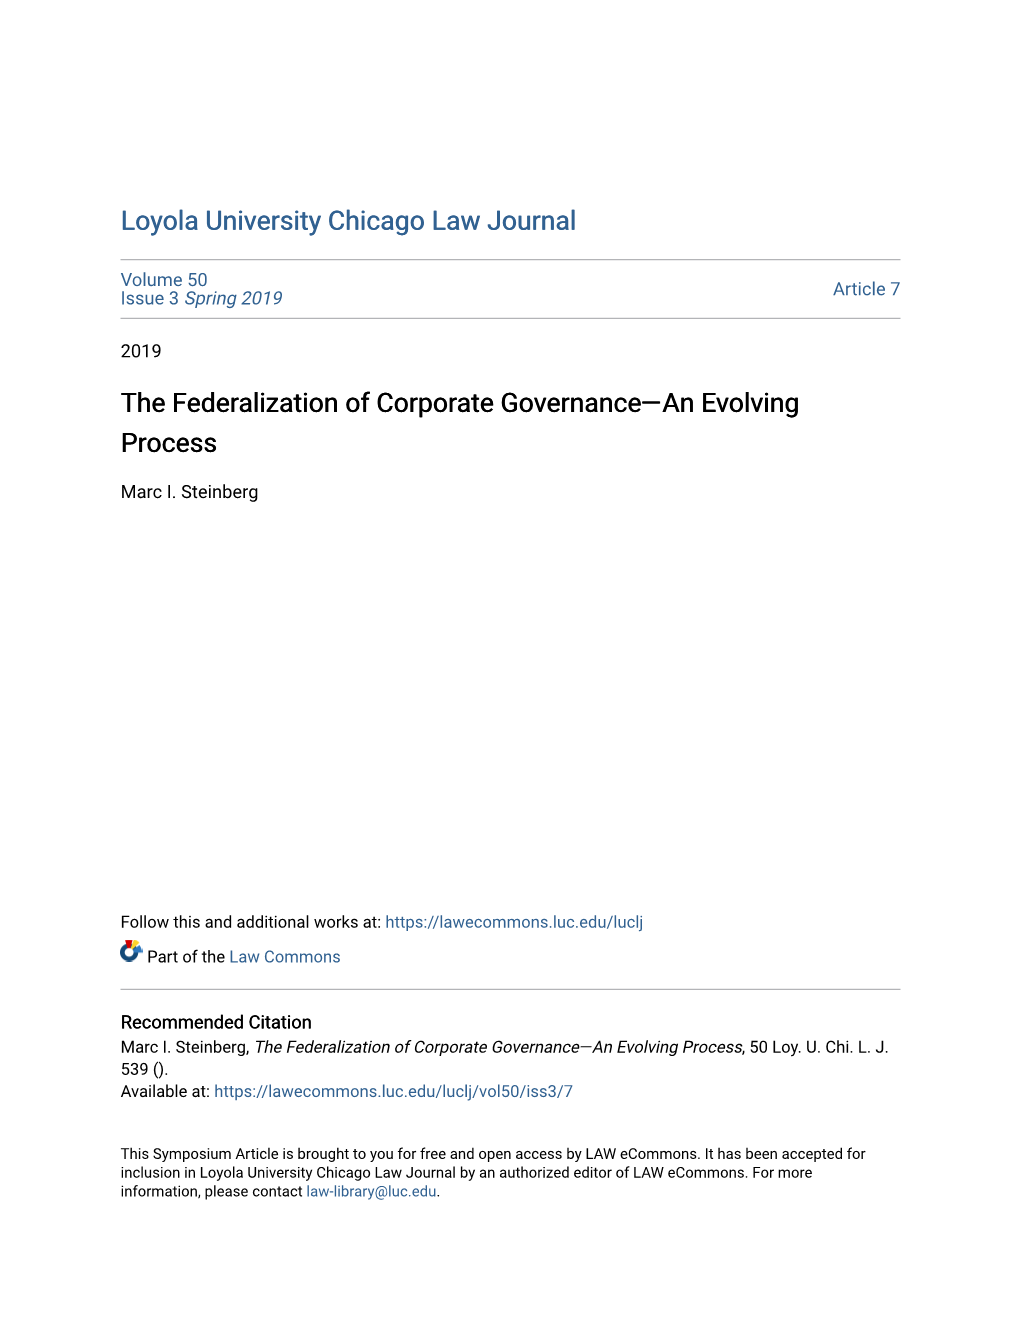 The Federalization of Corporate Governance—An Evolving Process